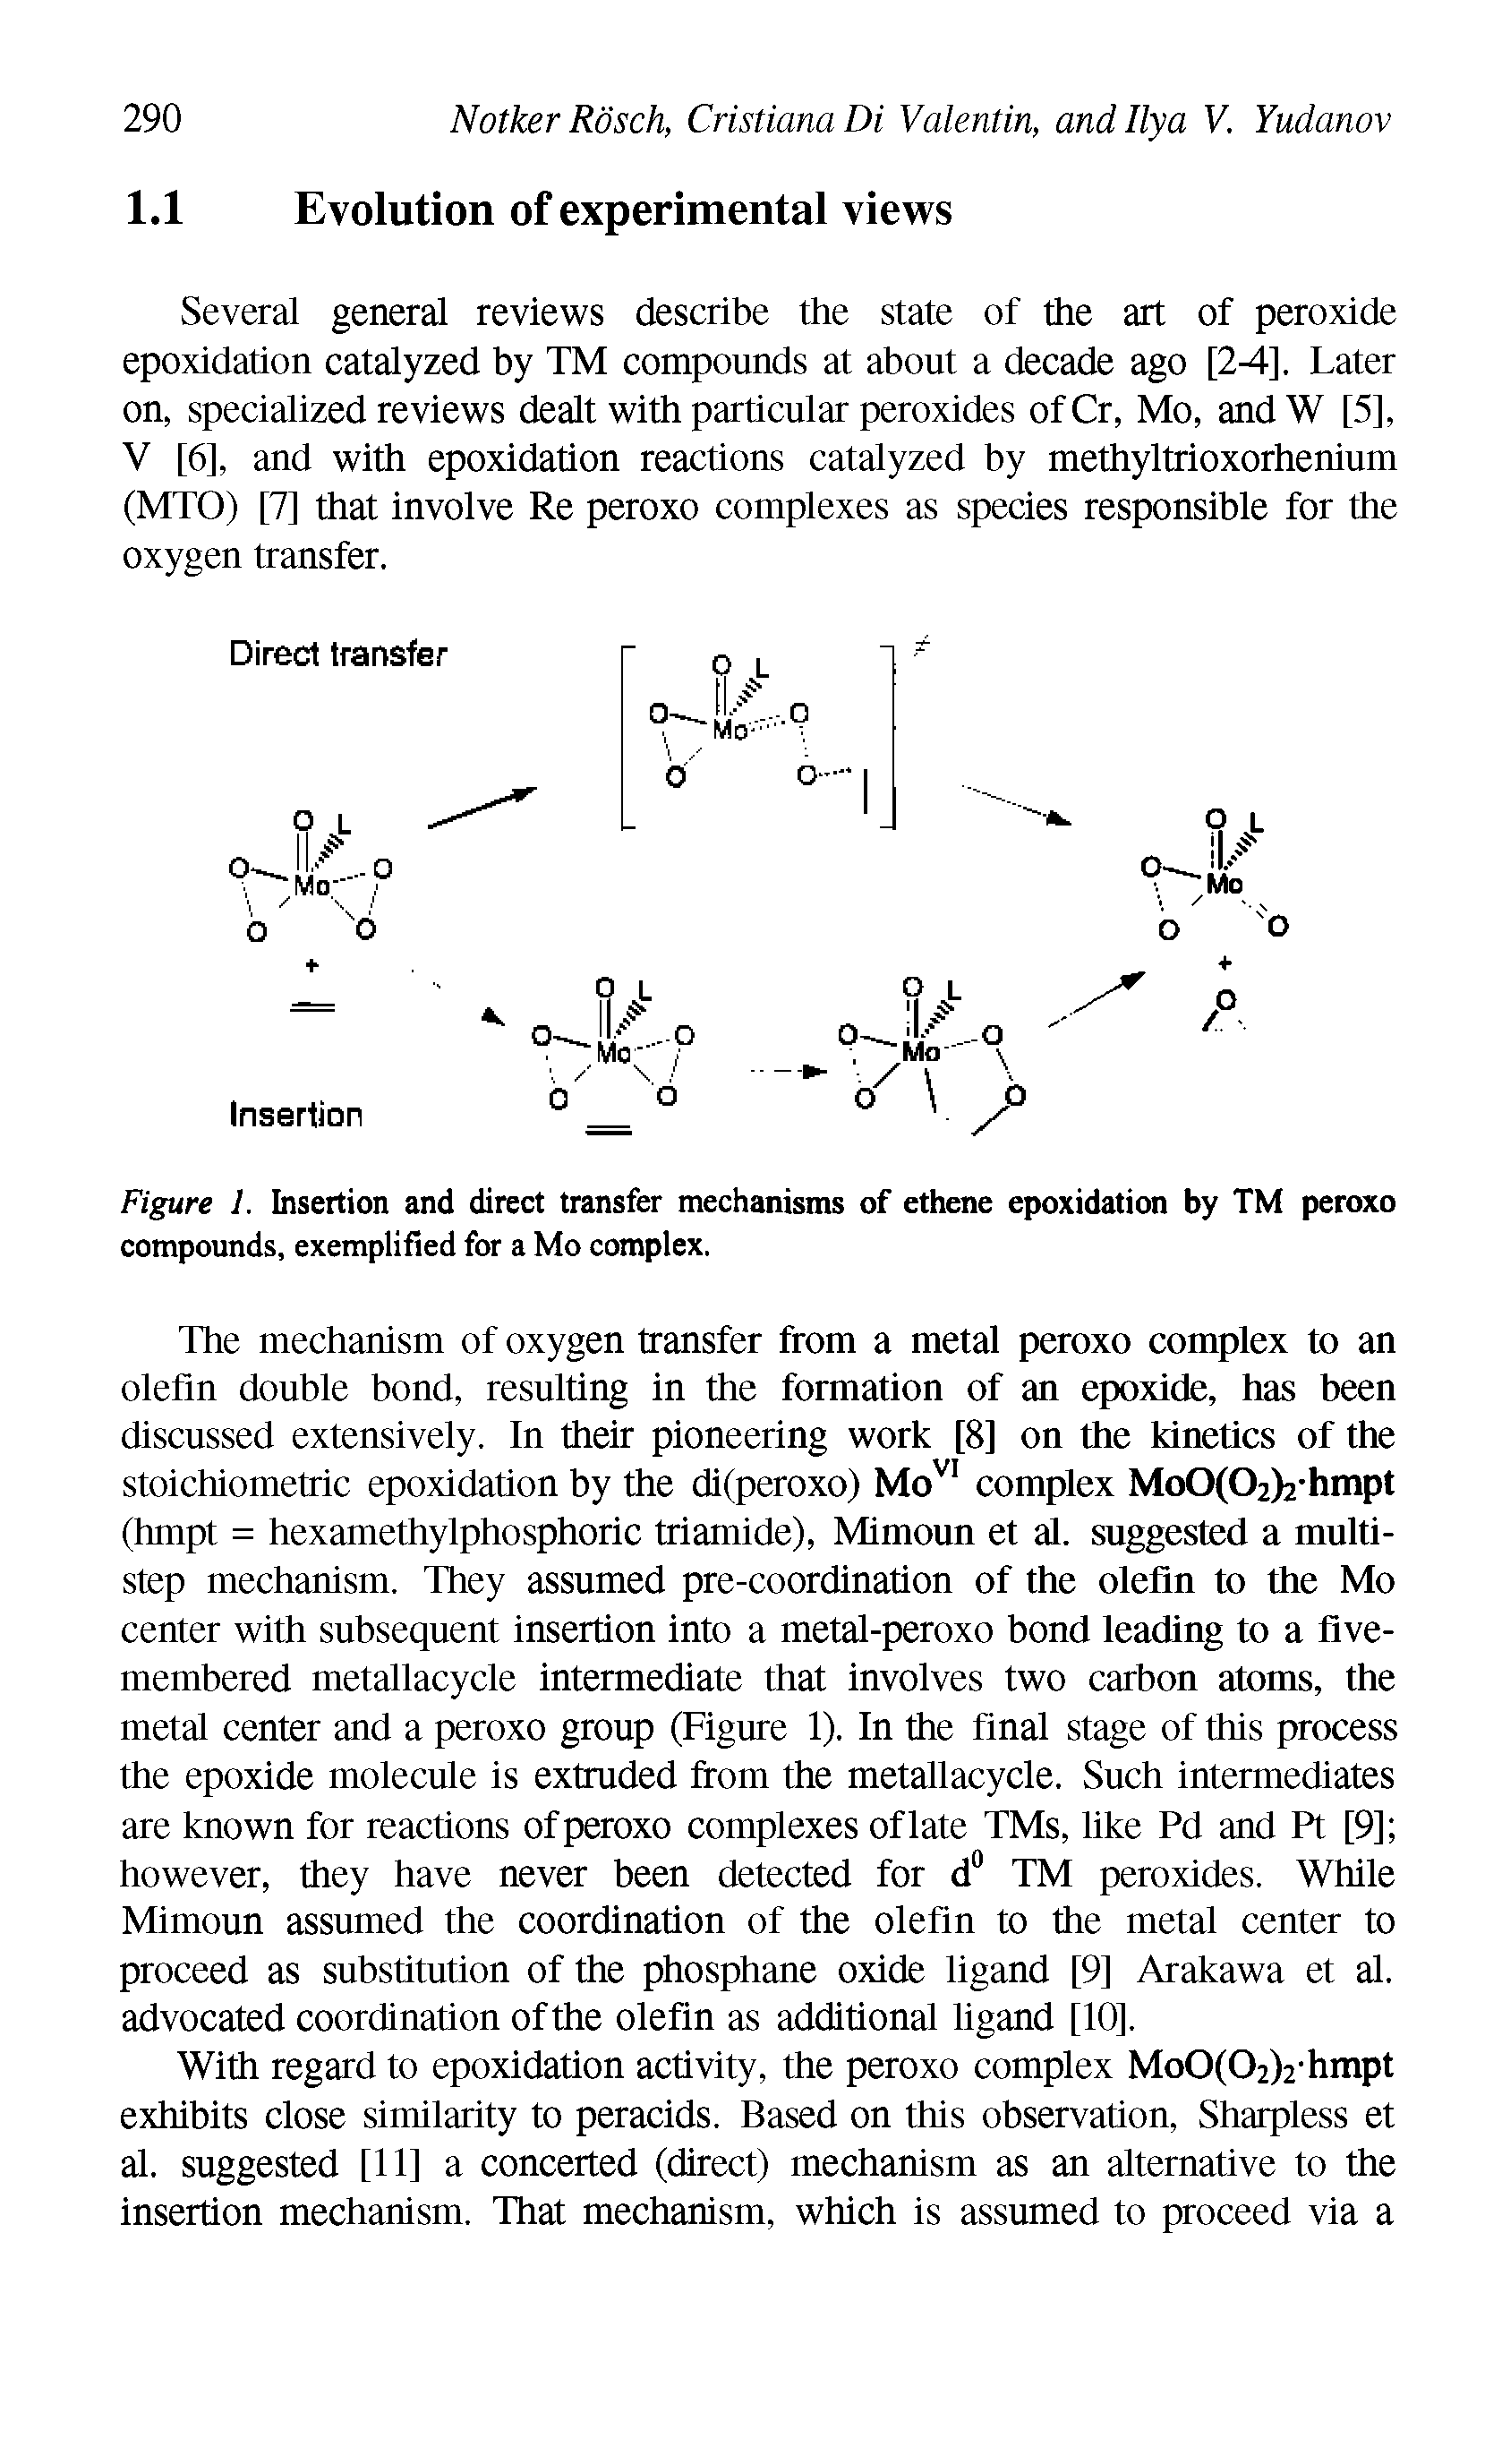 Figure I. Insertion and direct transfer mechanisms of ethene epoxidation by TM peroxo compounds, exemplified for a Mo complex.